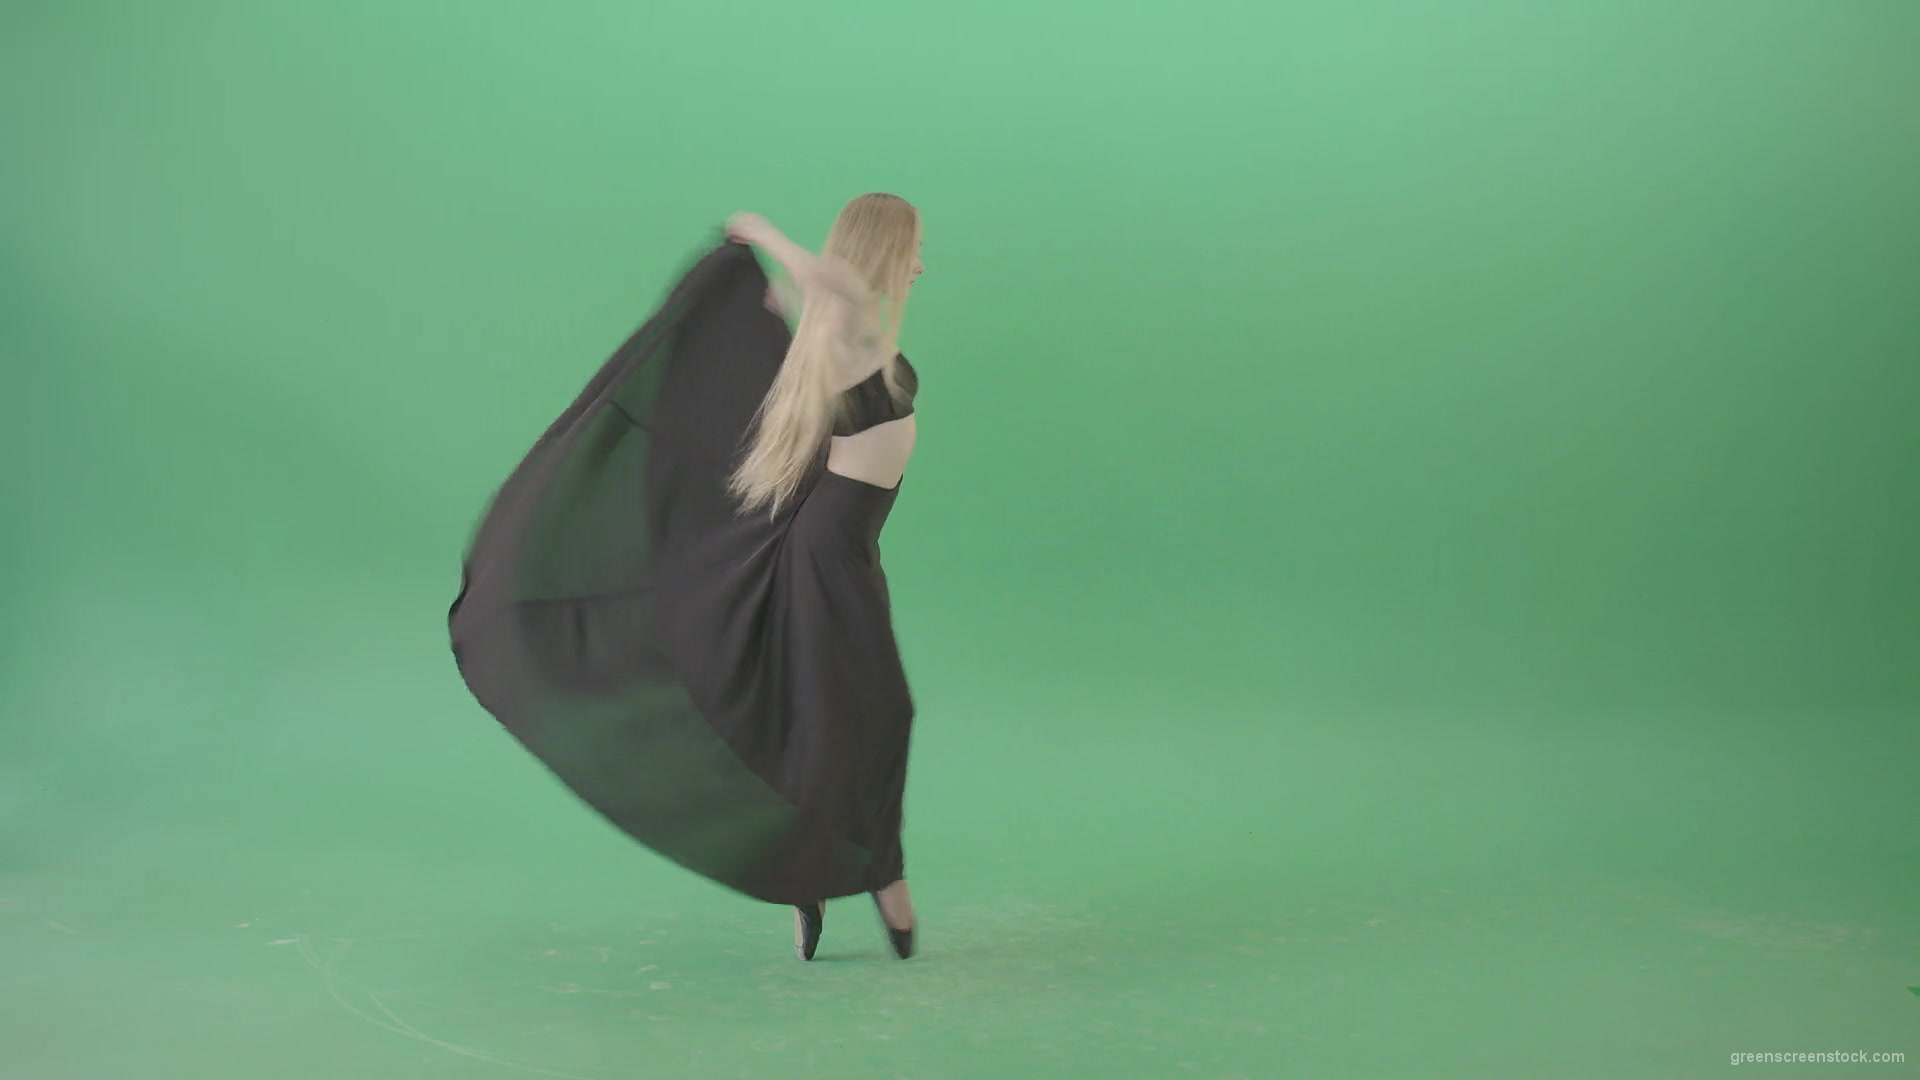 Spinning-isolated-on-green-screen-ballet-young-woman-ballerin-in-black-costume-4K-Video-Footage-1920_004 Green Screen Stock